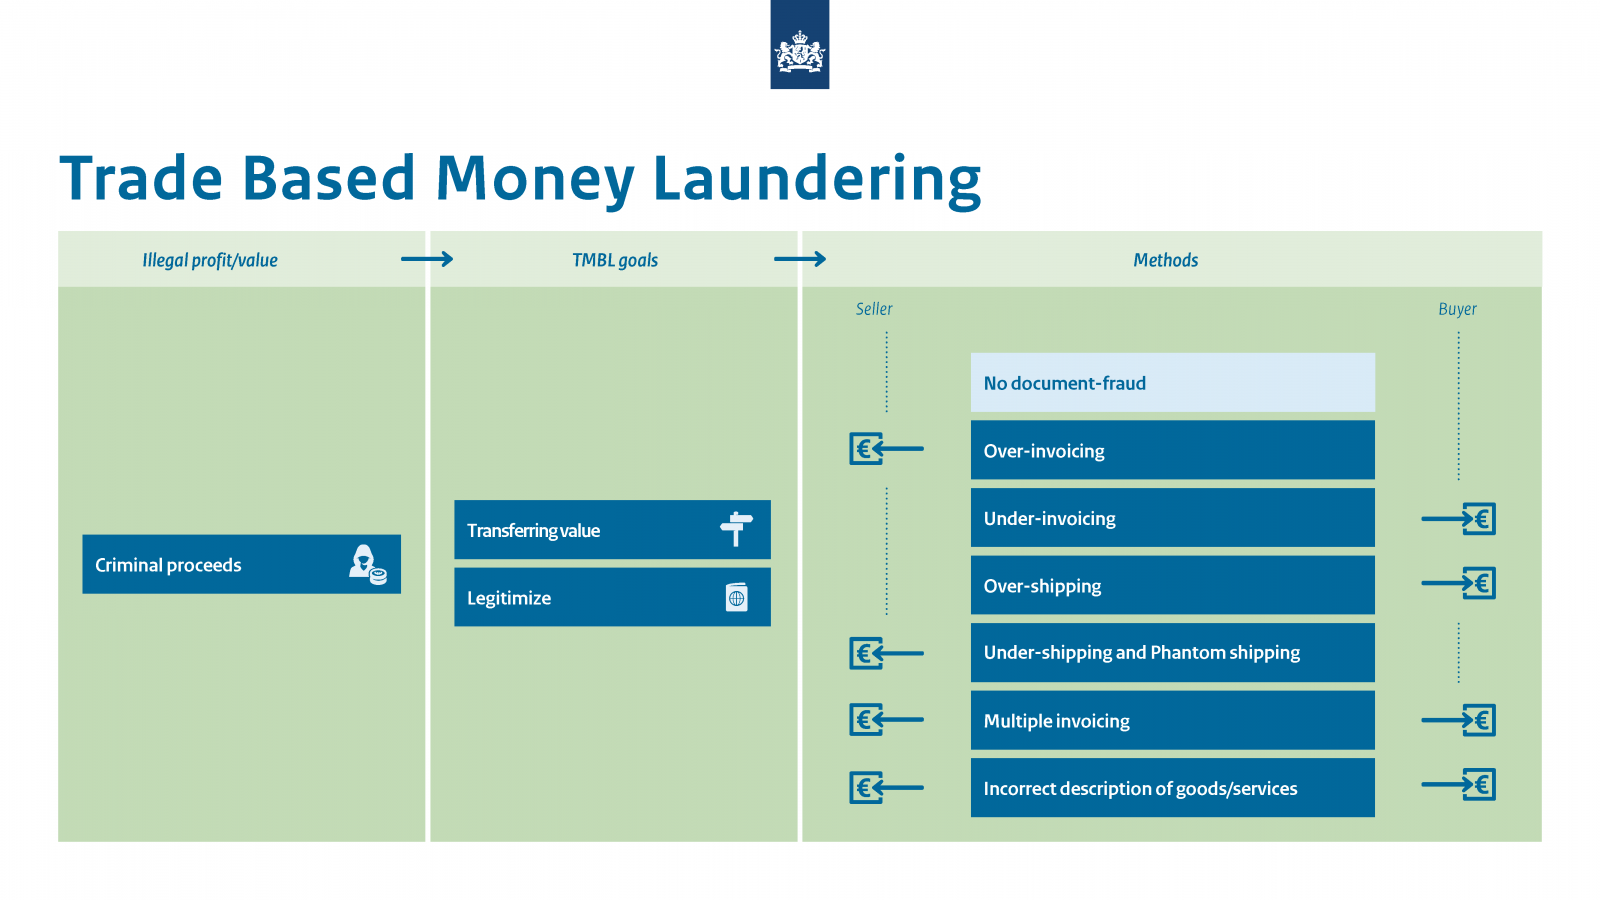 Infographic Trade Based Money Laundering. 3 columns: Illegal profit/value (criminal proceeds); TBML goals (Transferring value; Legitimize); Methods (No document fraud; Over-invoicing; Under-invoicing; Over-shipping; Under-shipping and Phantom shipping; Multiple invoicing; Incorrect description of goods/services)